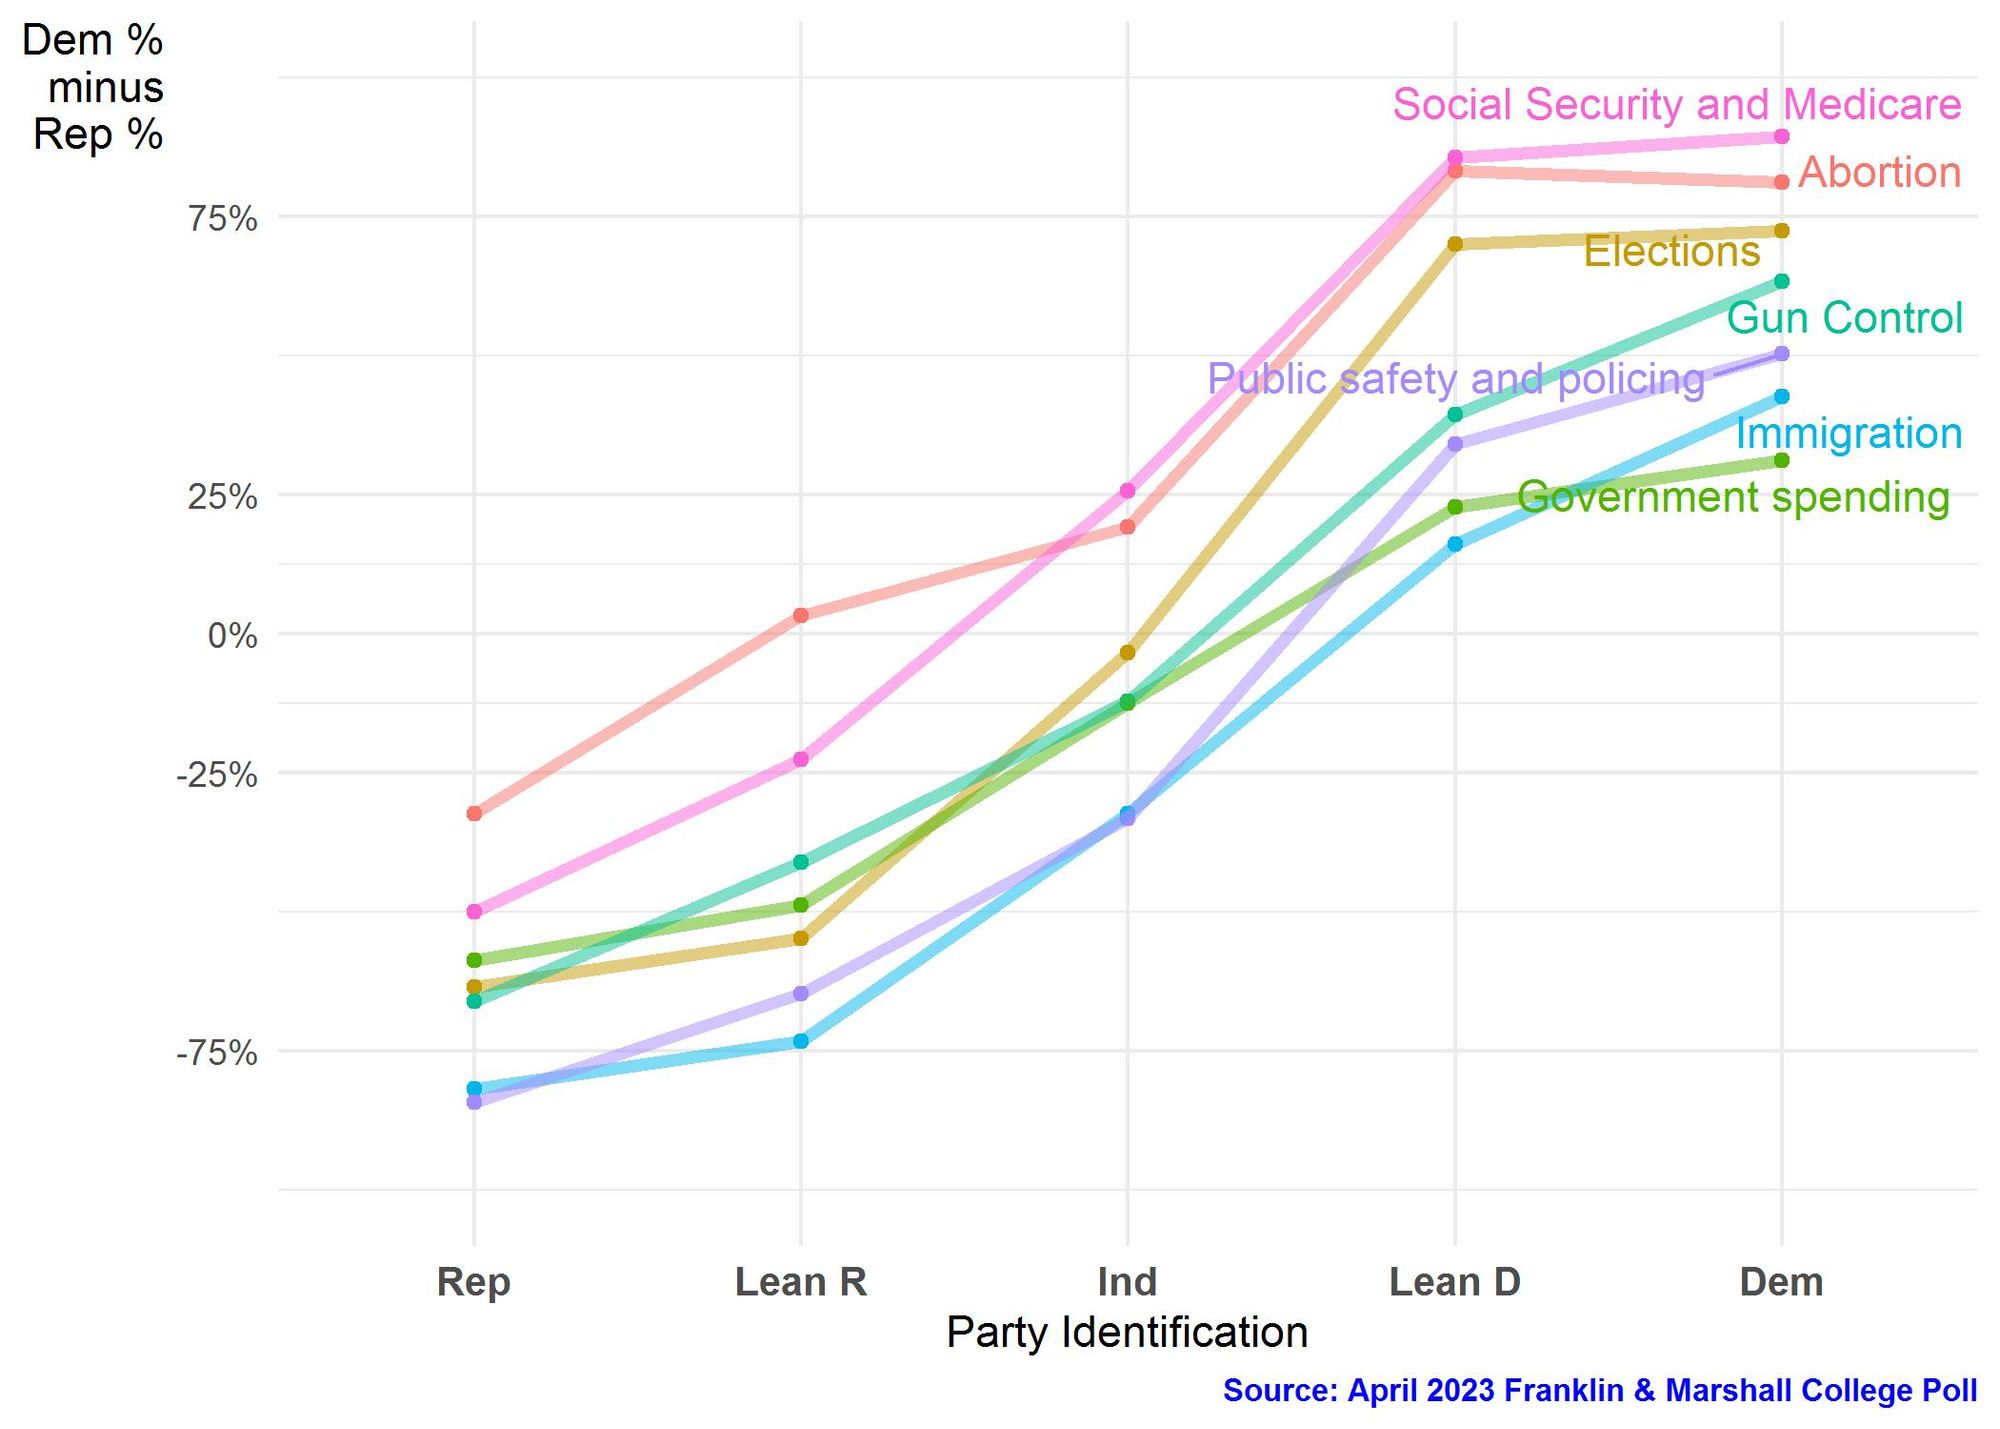 Figure 1. Line graph showing each party’s perceived alignment with majority opinion on seven different issues according to party self-identification. Each line represents a different policy issue and the value reported for each issue represents the proportion who reported Democrats minus the proportion who reported Republicans as being aligned with majority opinion.